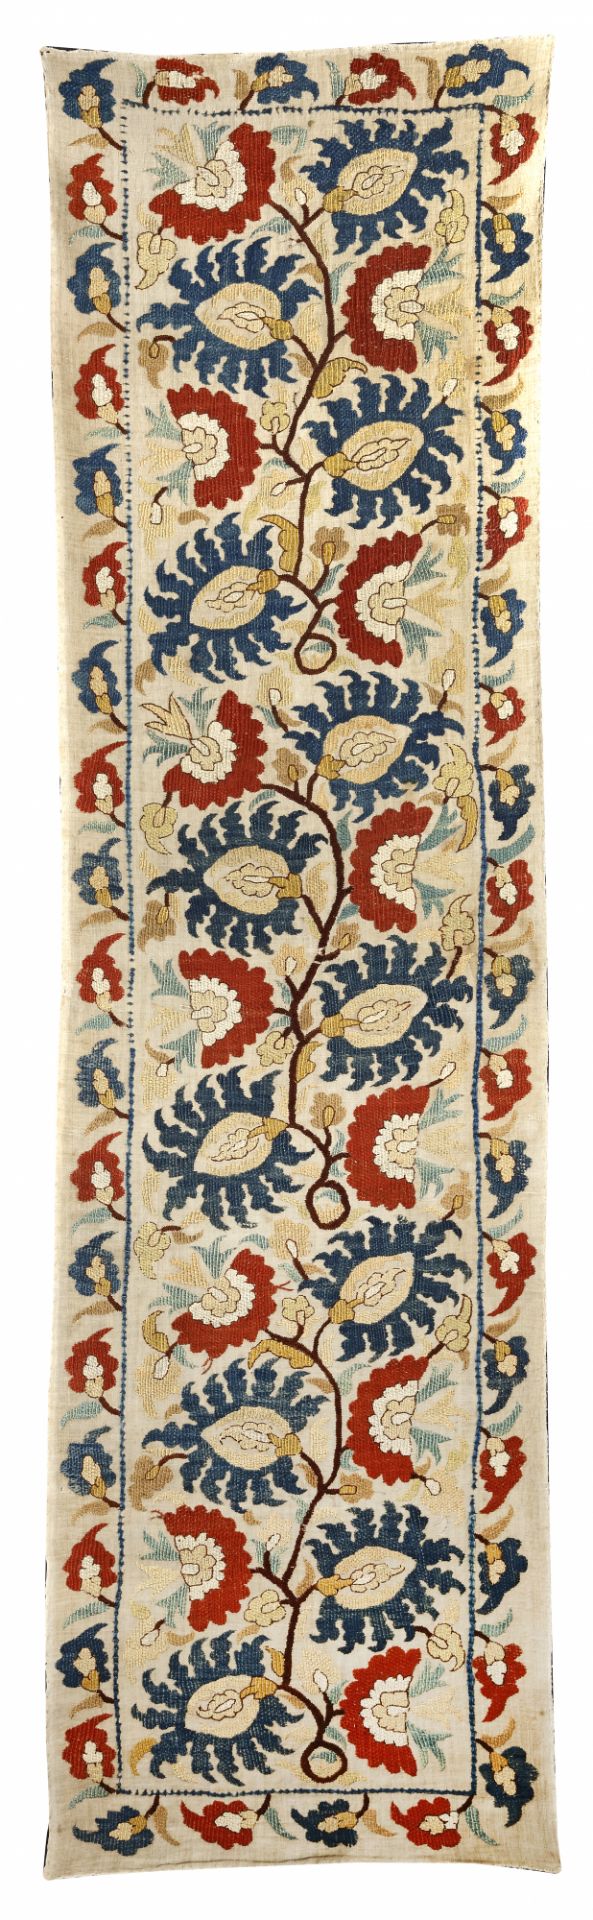 A SILK ON LINEN MIRROR COVER, OTTOMAN, 17TH CENTURY - Image 2 of 2